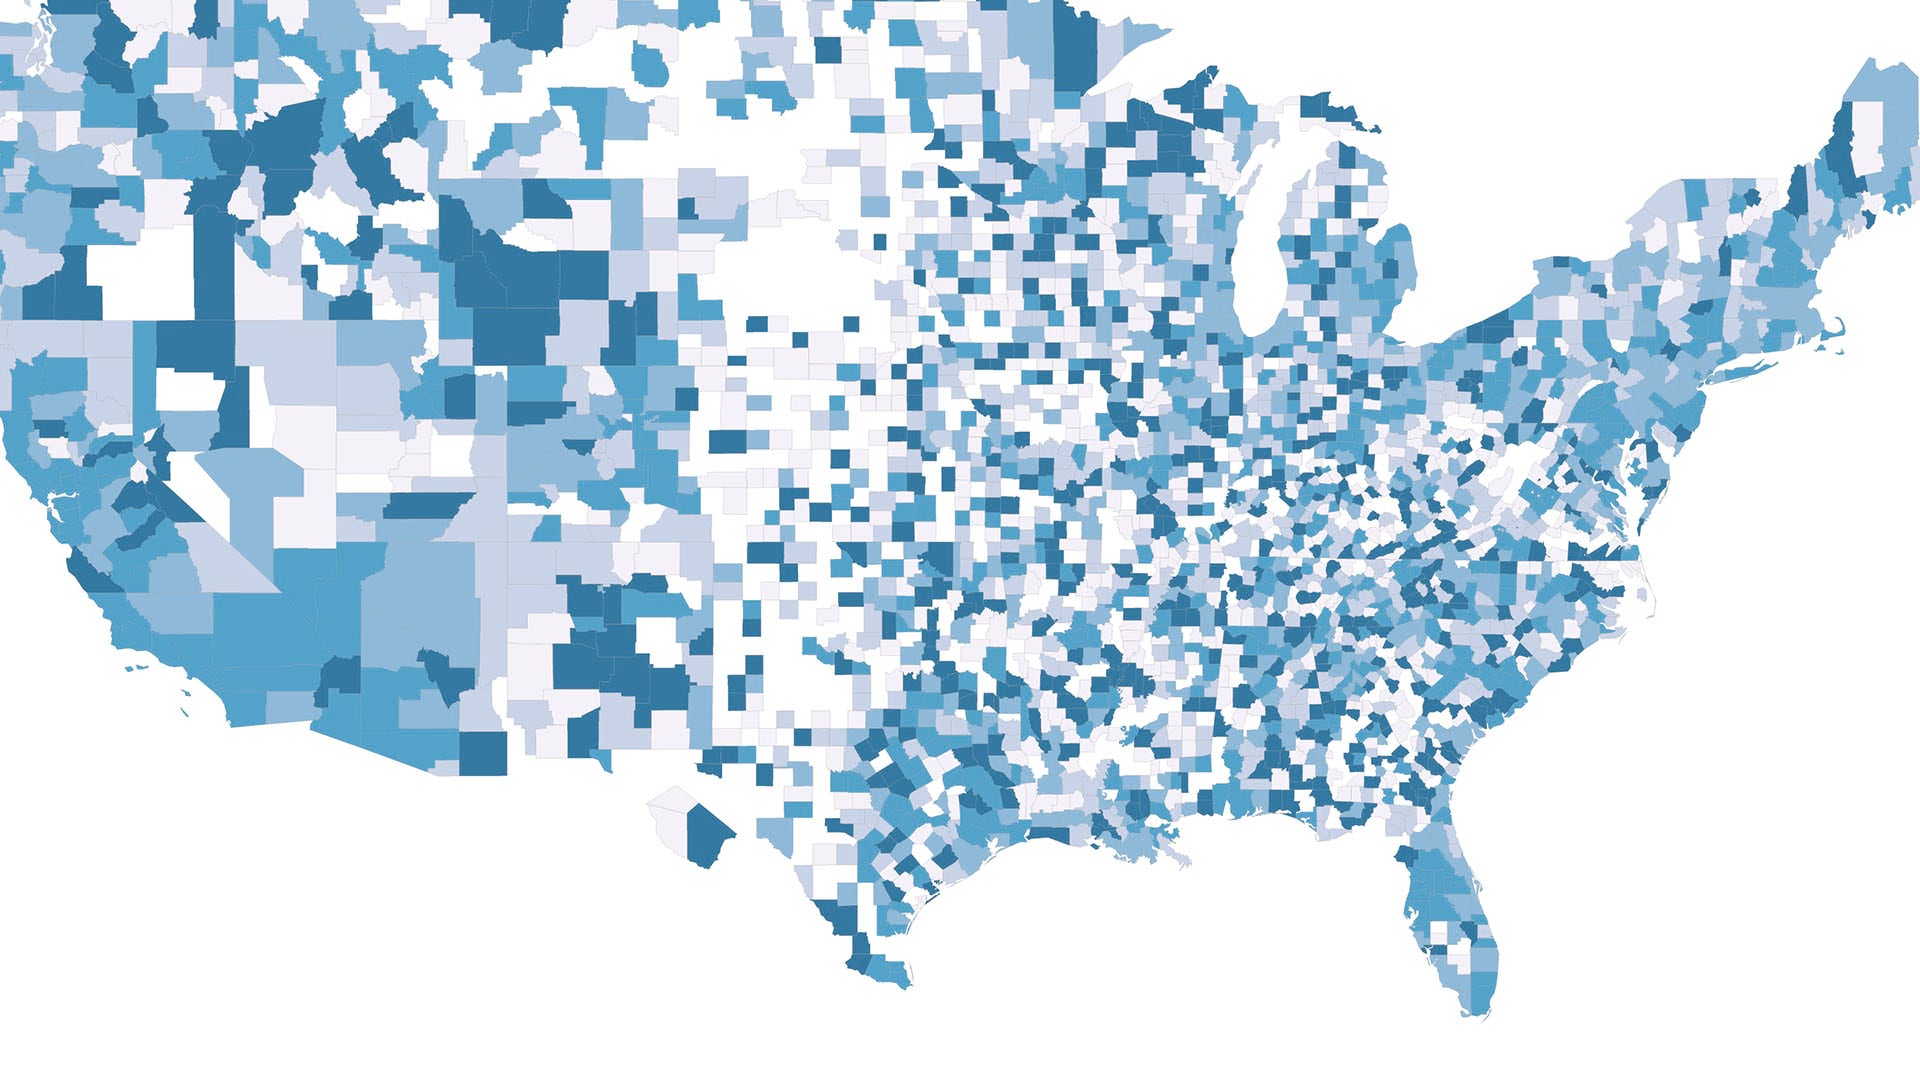 This map of the US shows hypothetical pockets of manufacturing due to supply chain disruptions